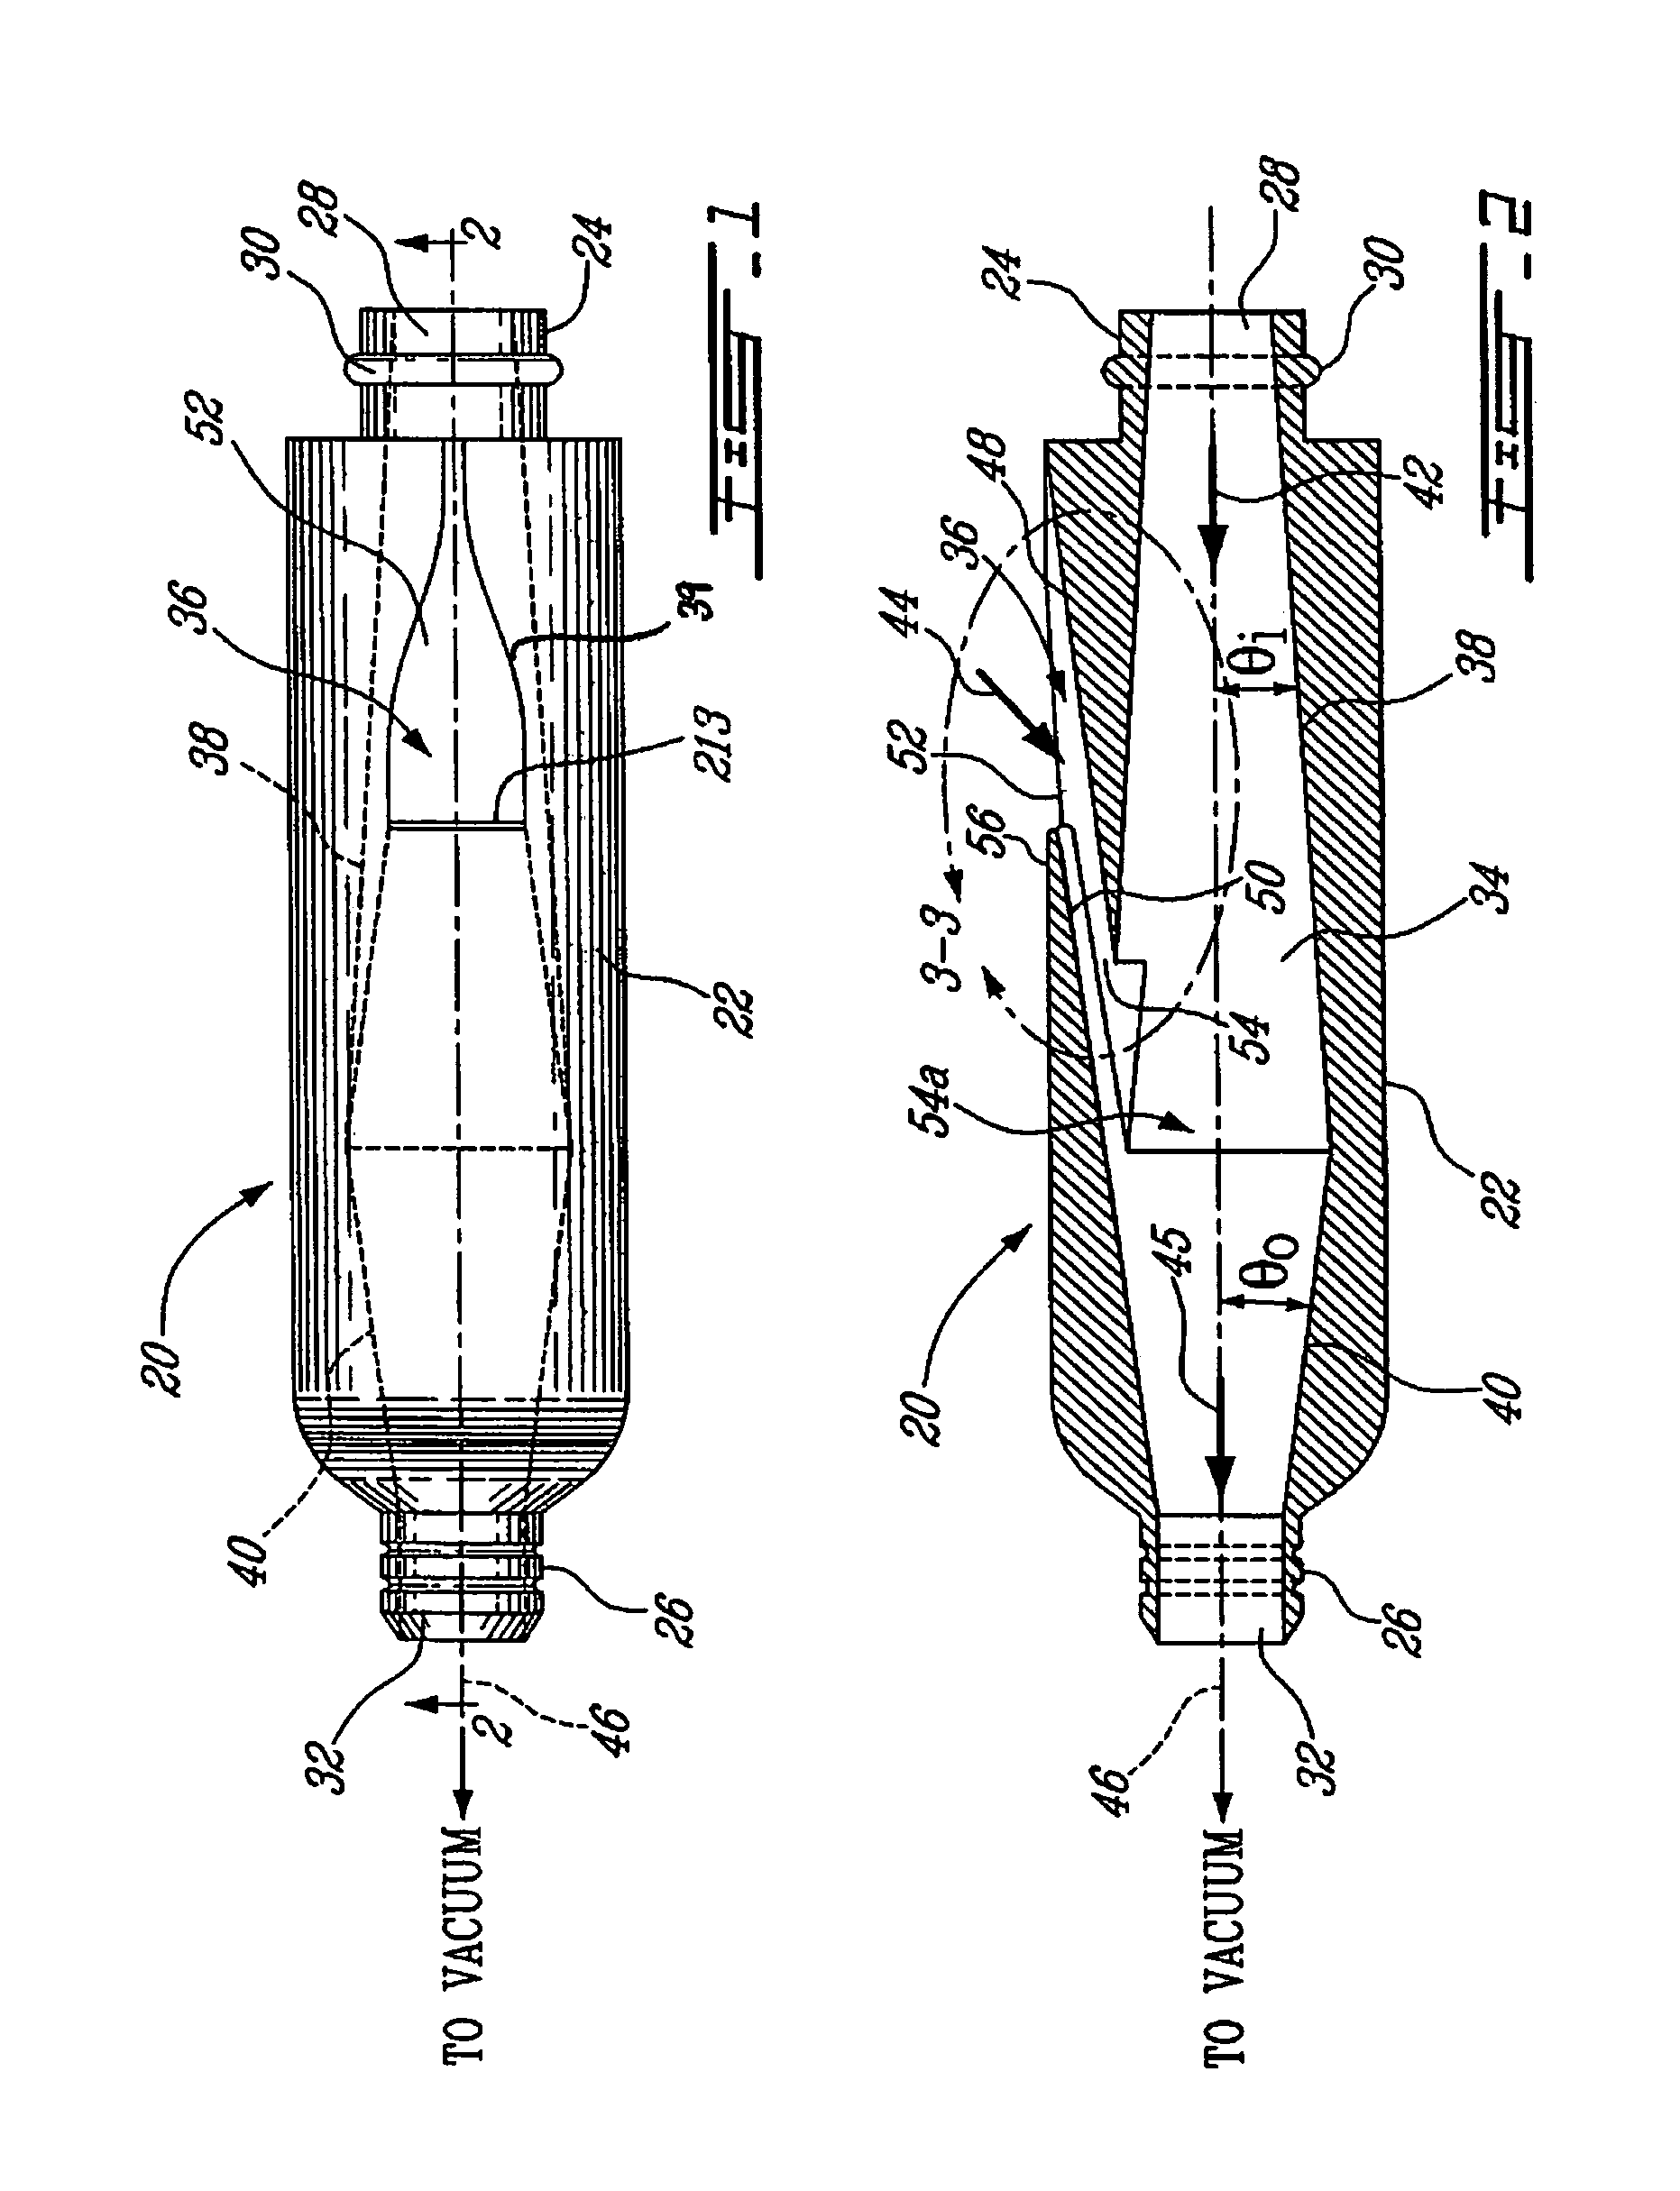 Low-noise vacuum release suction device and controllable aspirator using same